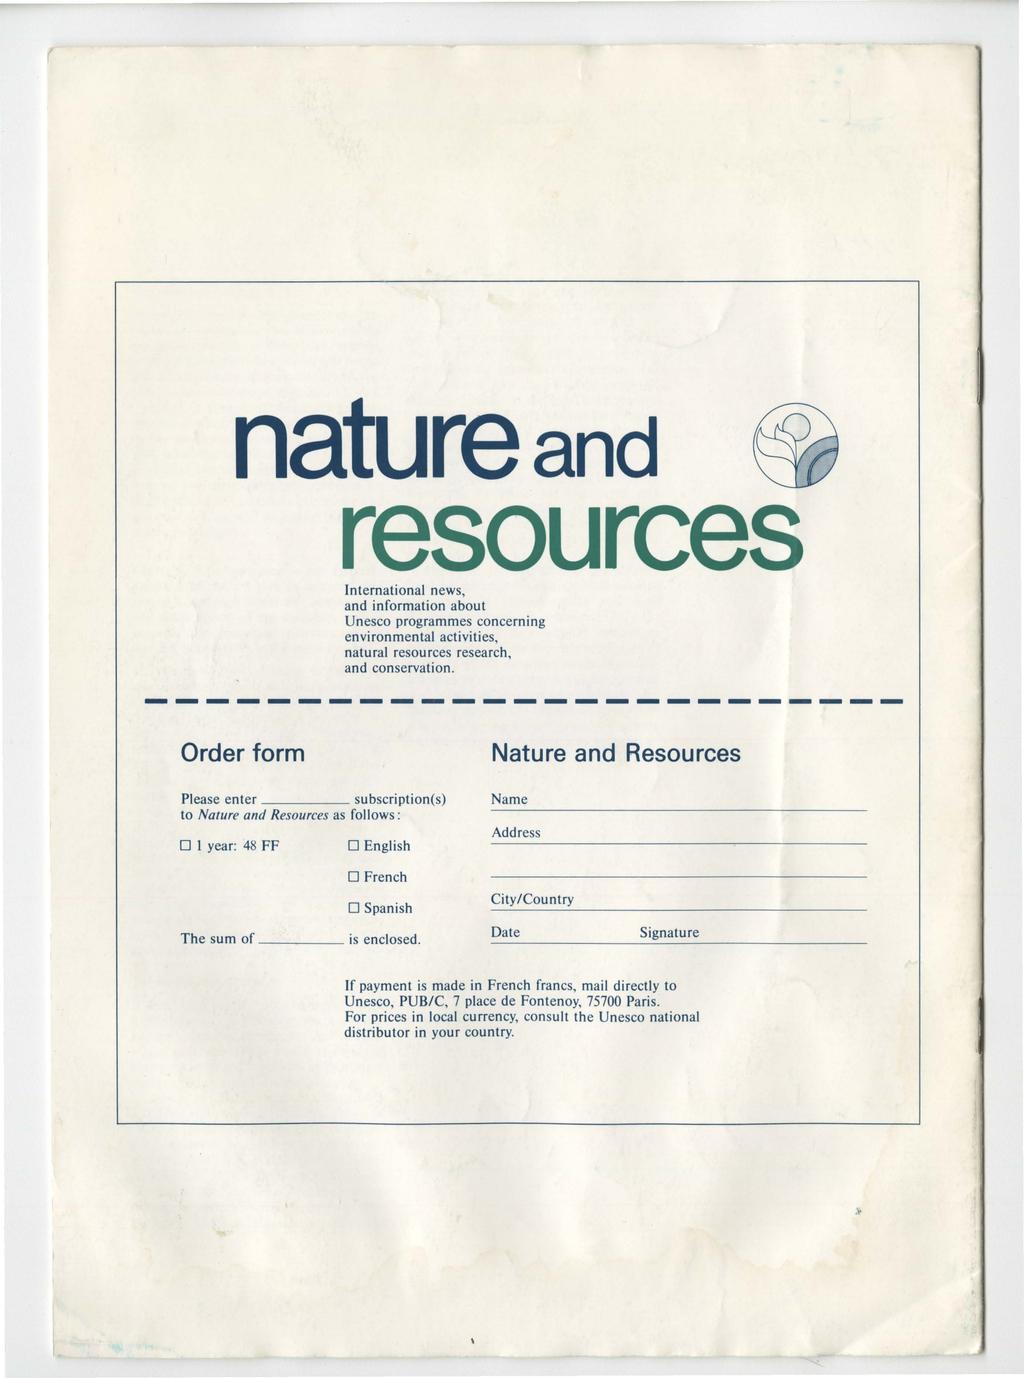 nature and @8 resources nternational news, and information about Unesco programmes concerning environmental activities, natural resources research, ------------------------- and conservation.